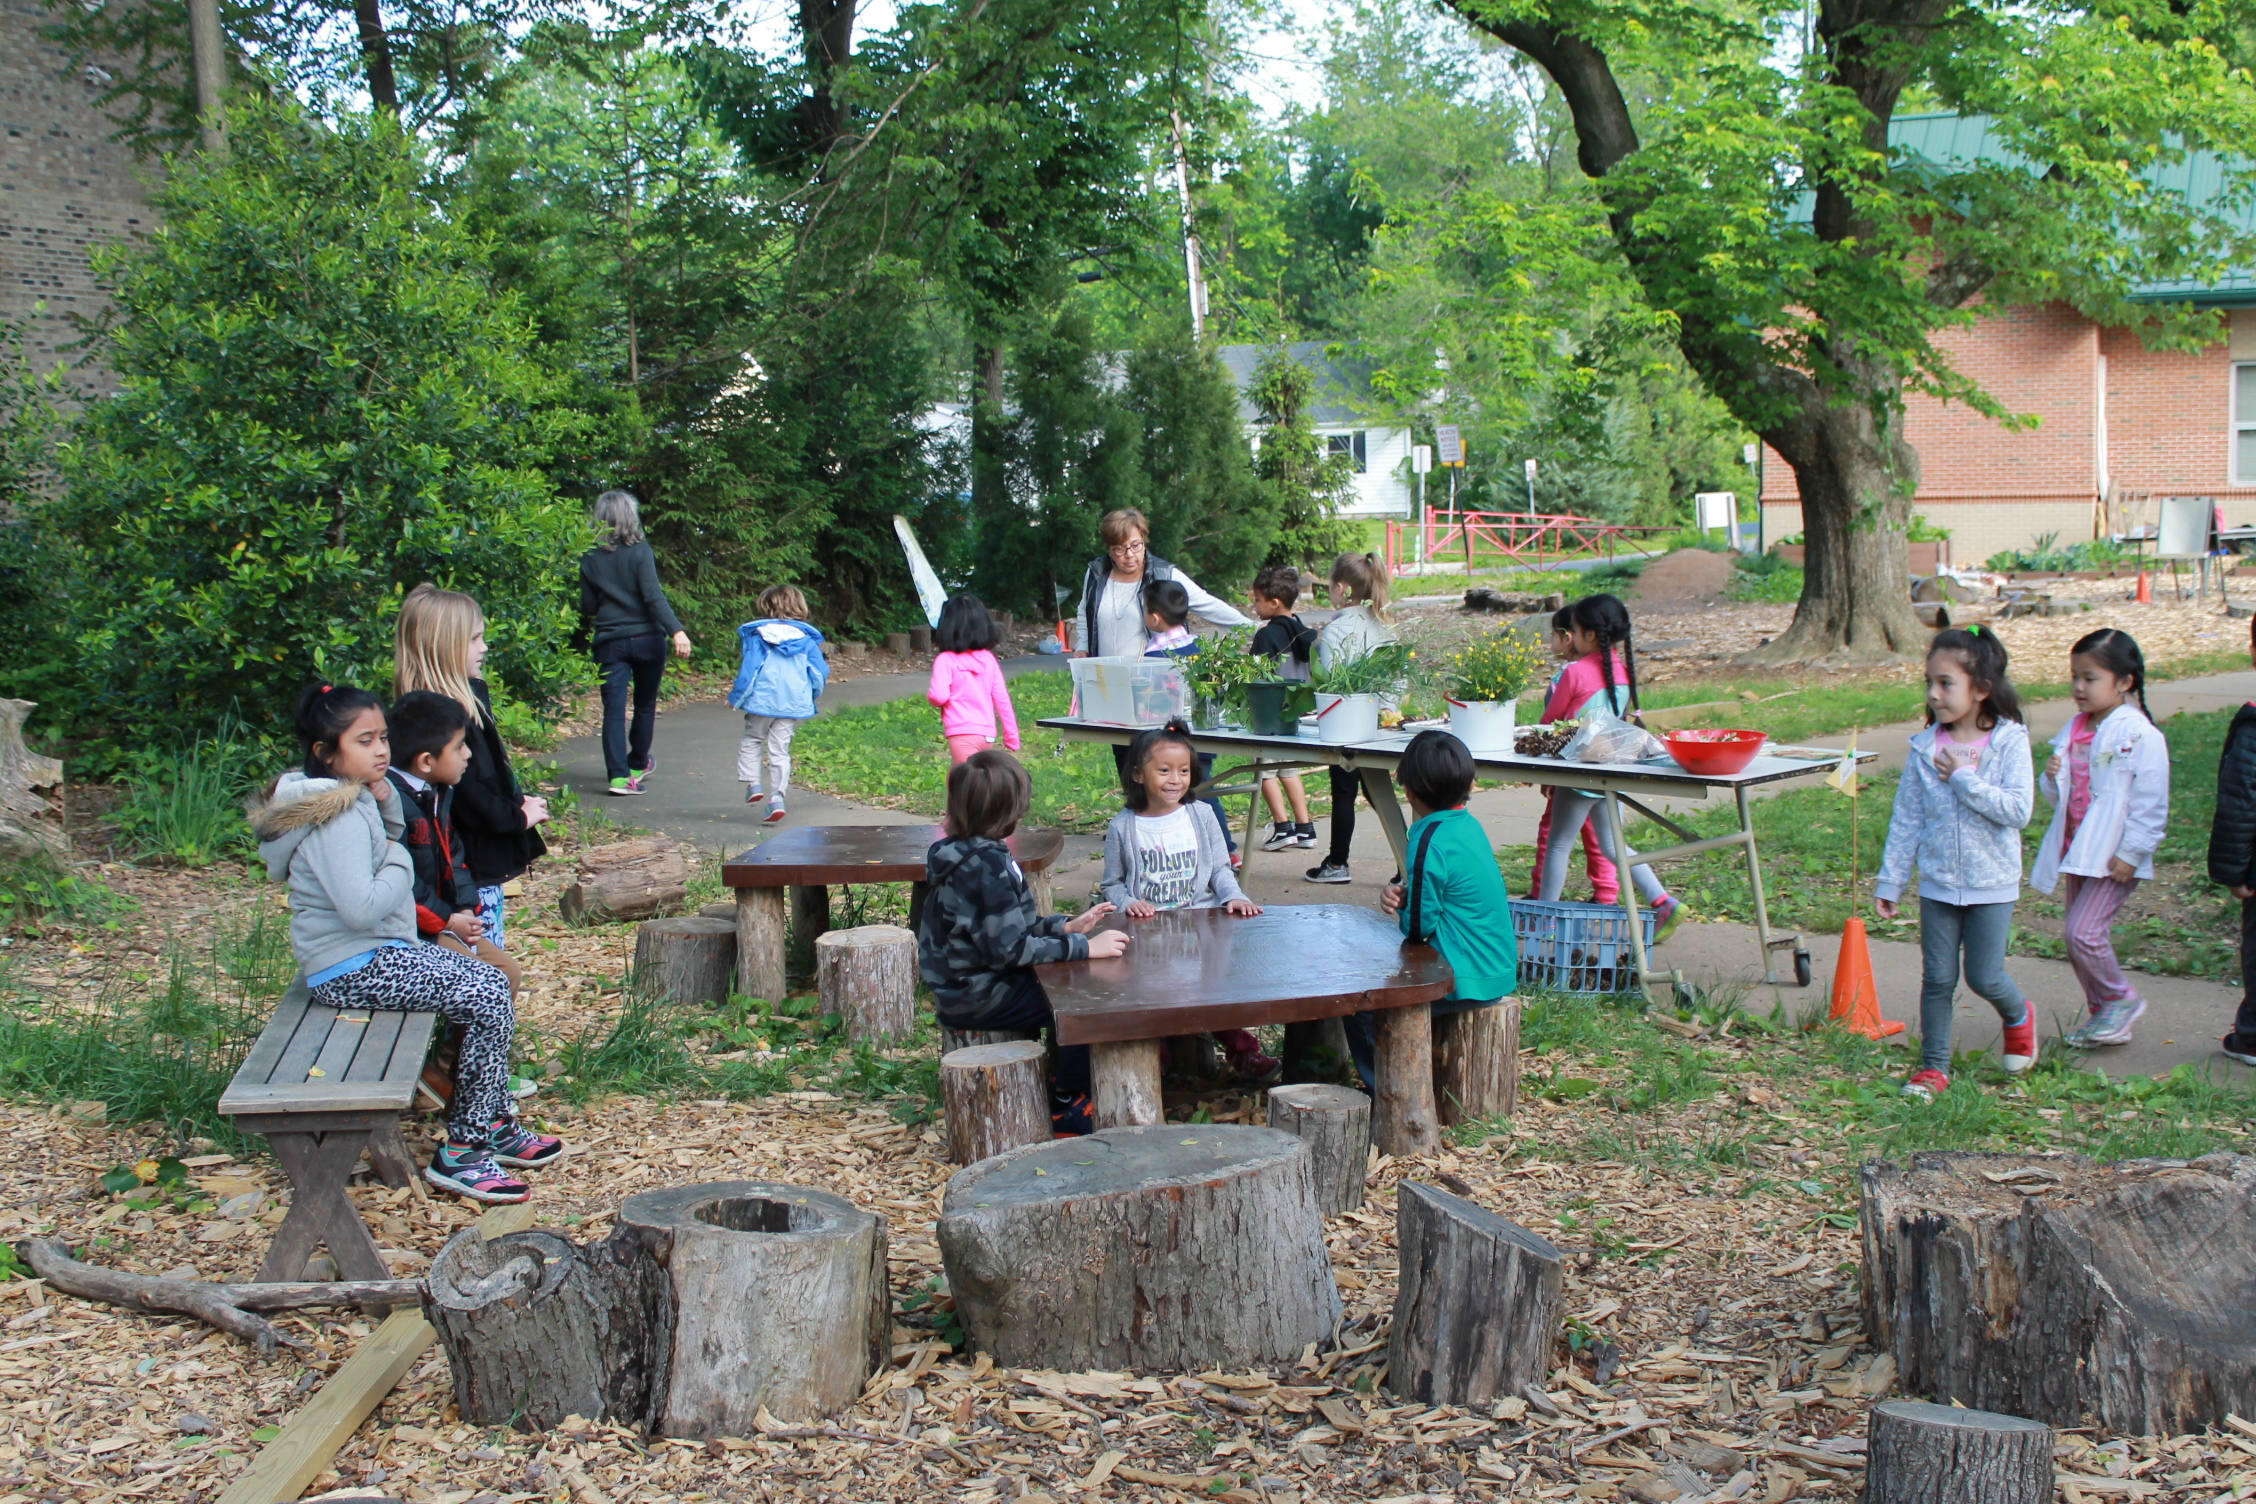 Students in various parts of the Discovery Area